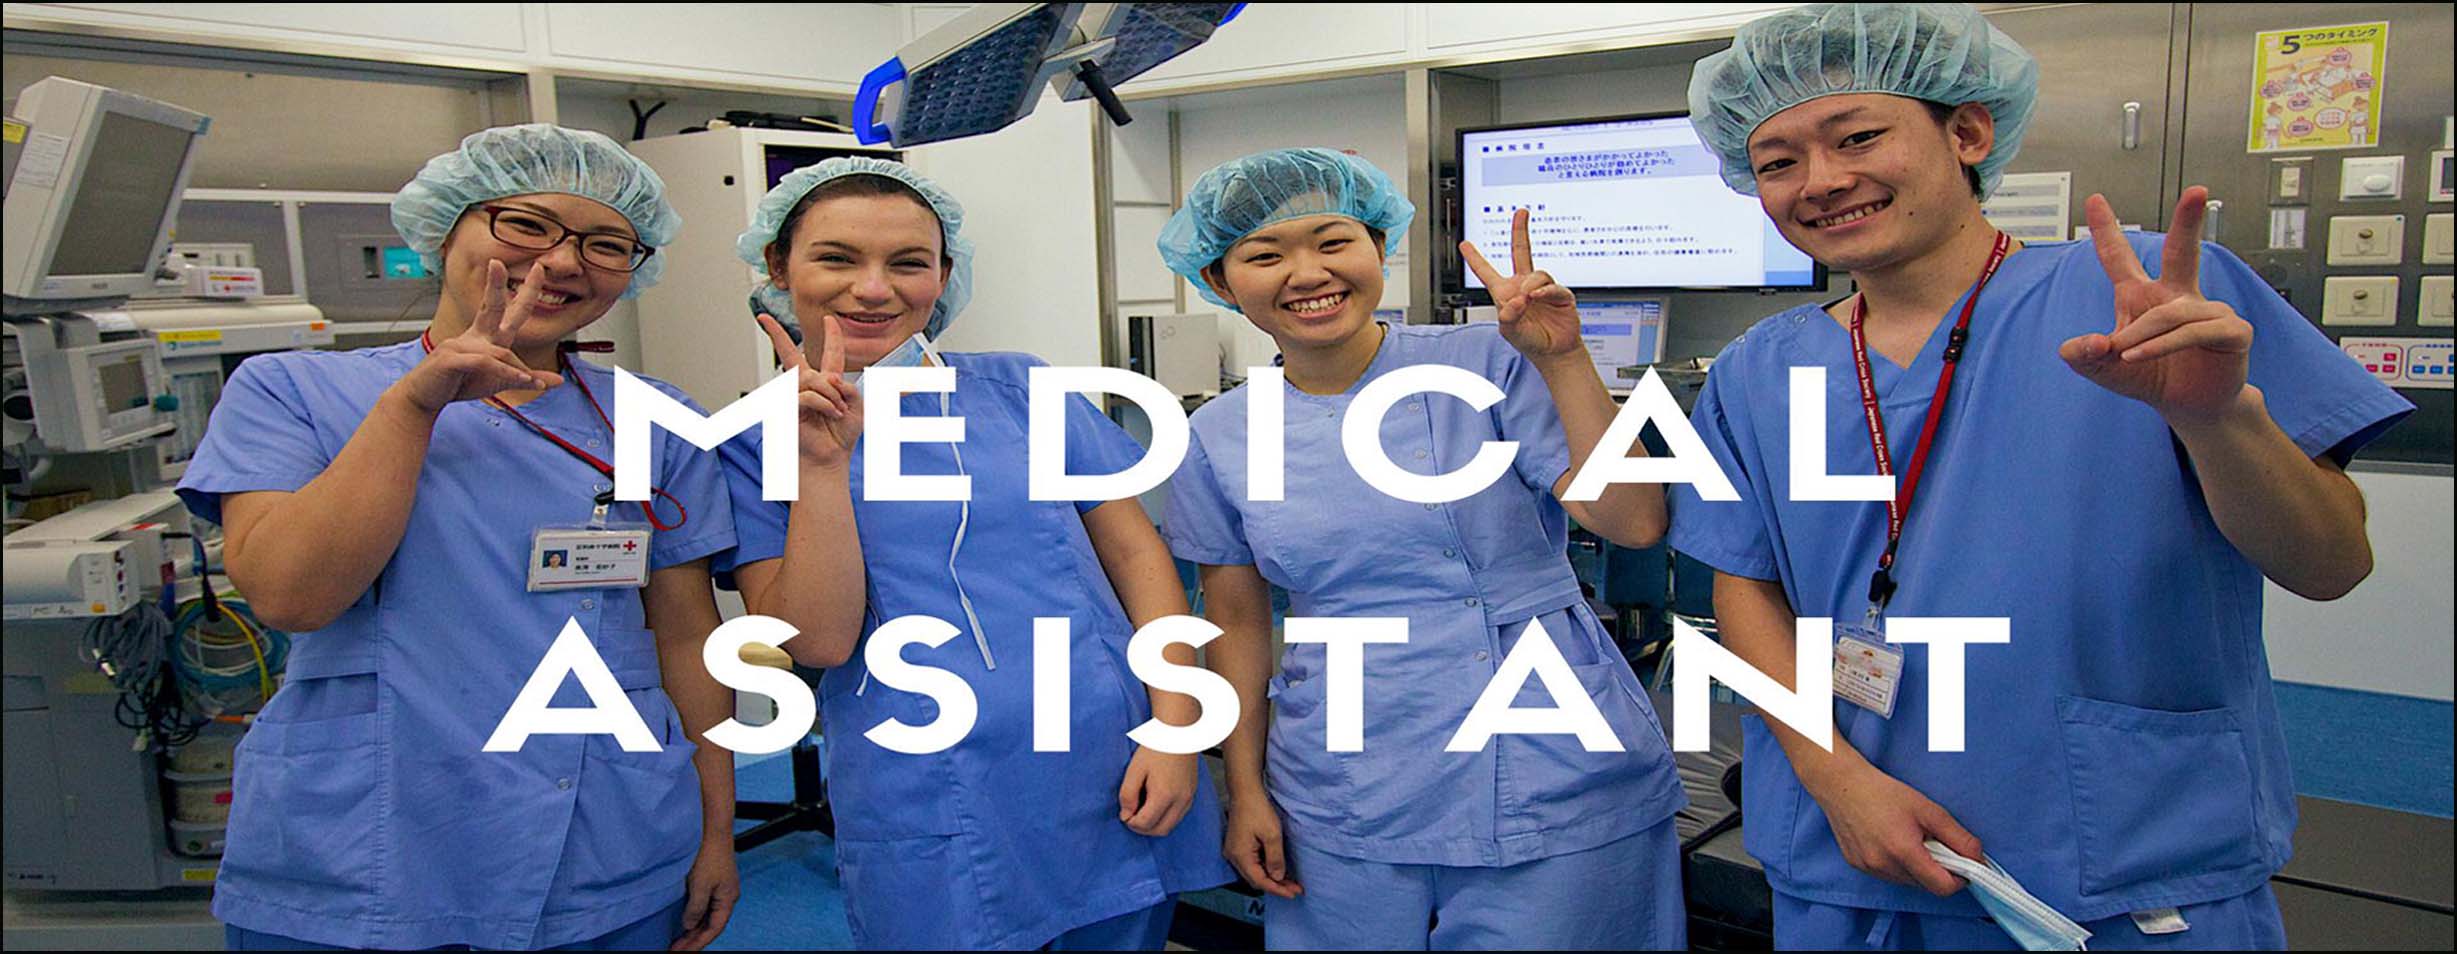 Primary Practitioners & Medical Assistant Association